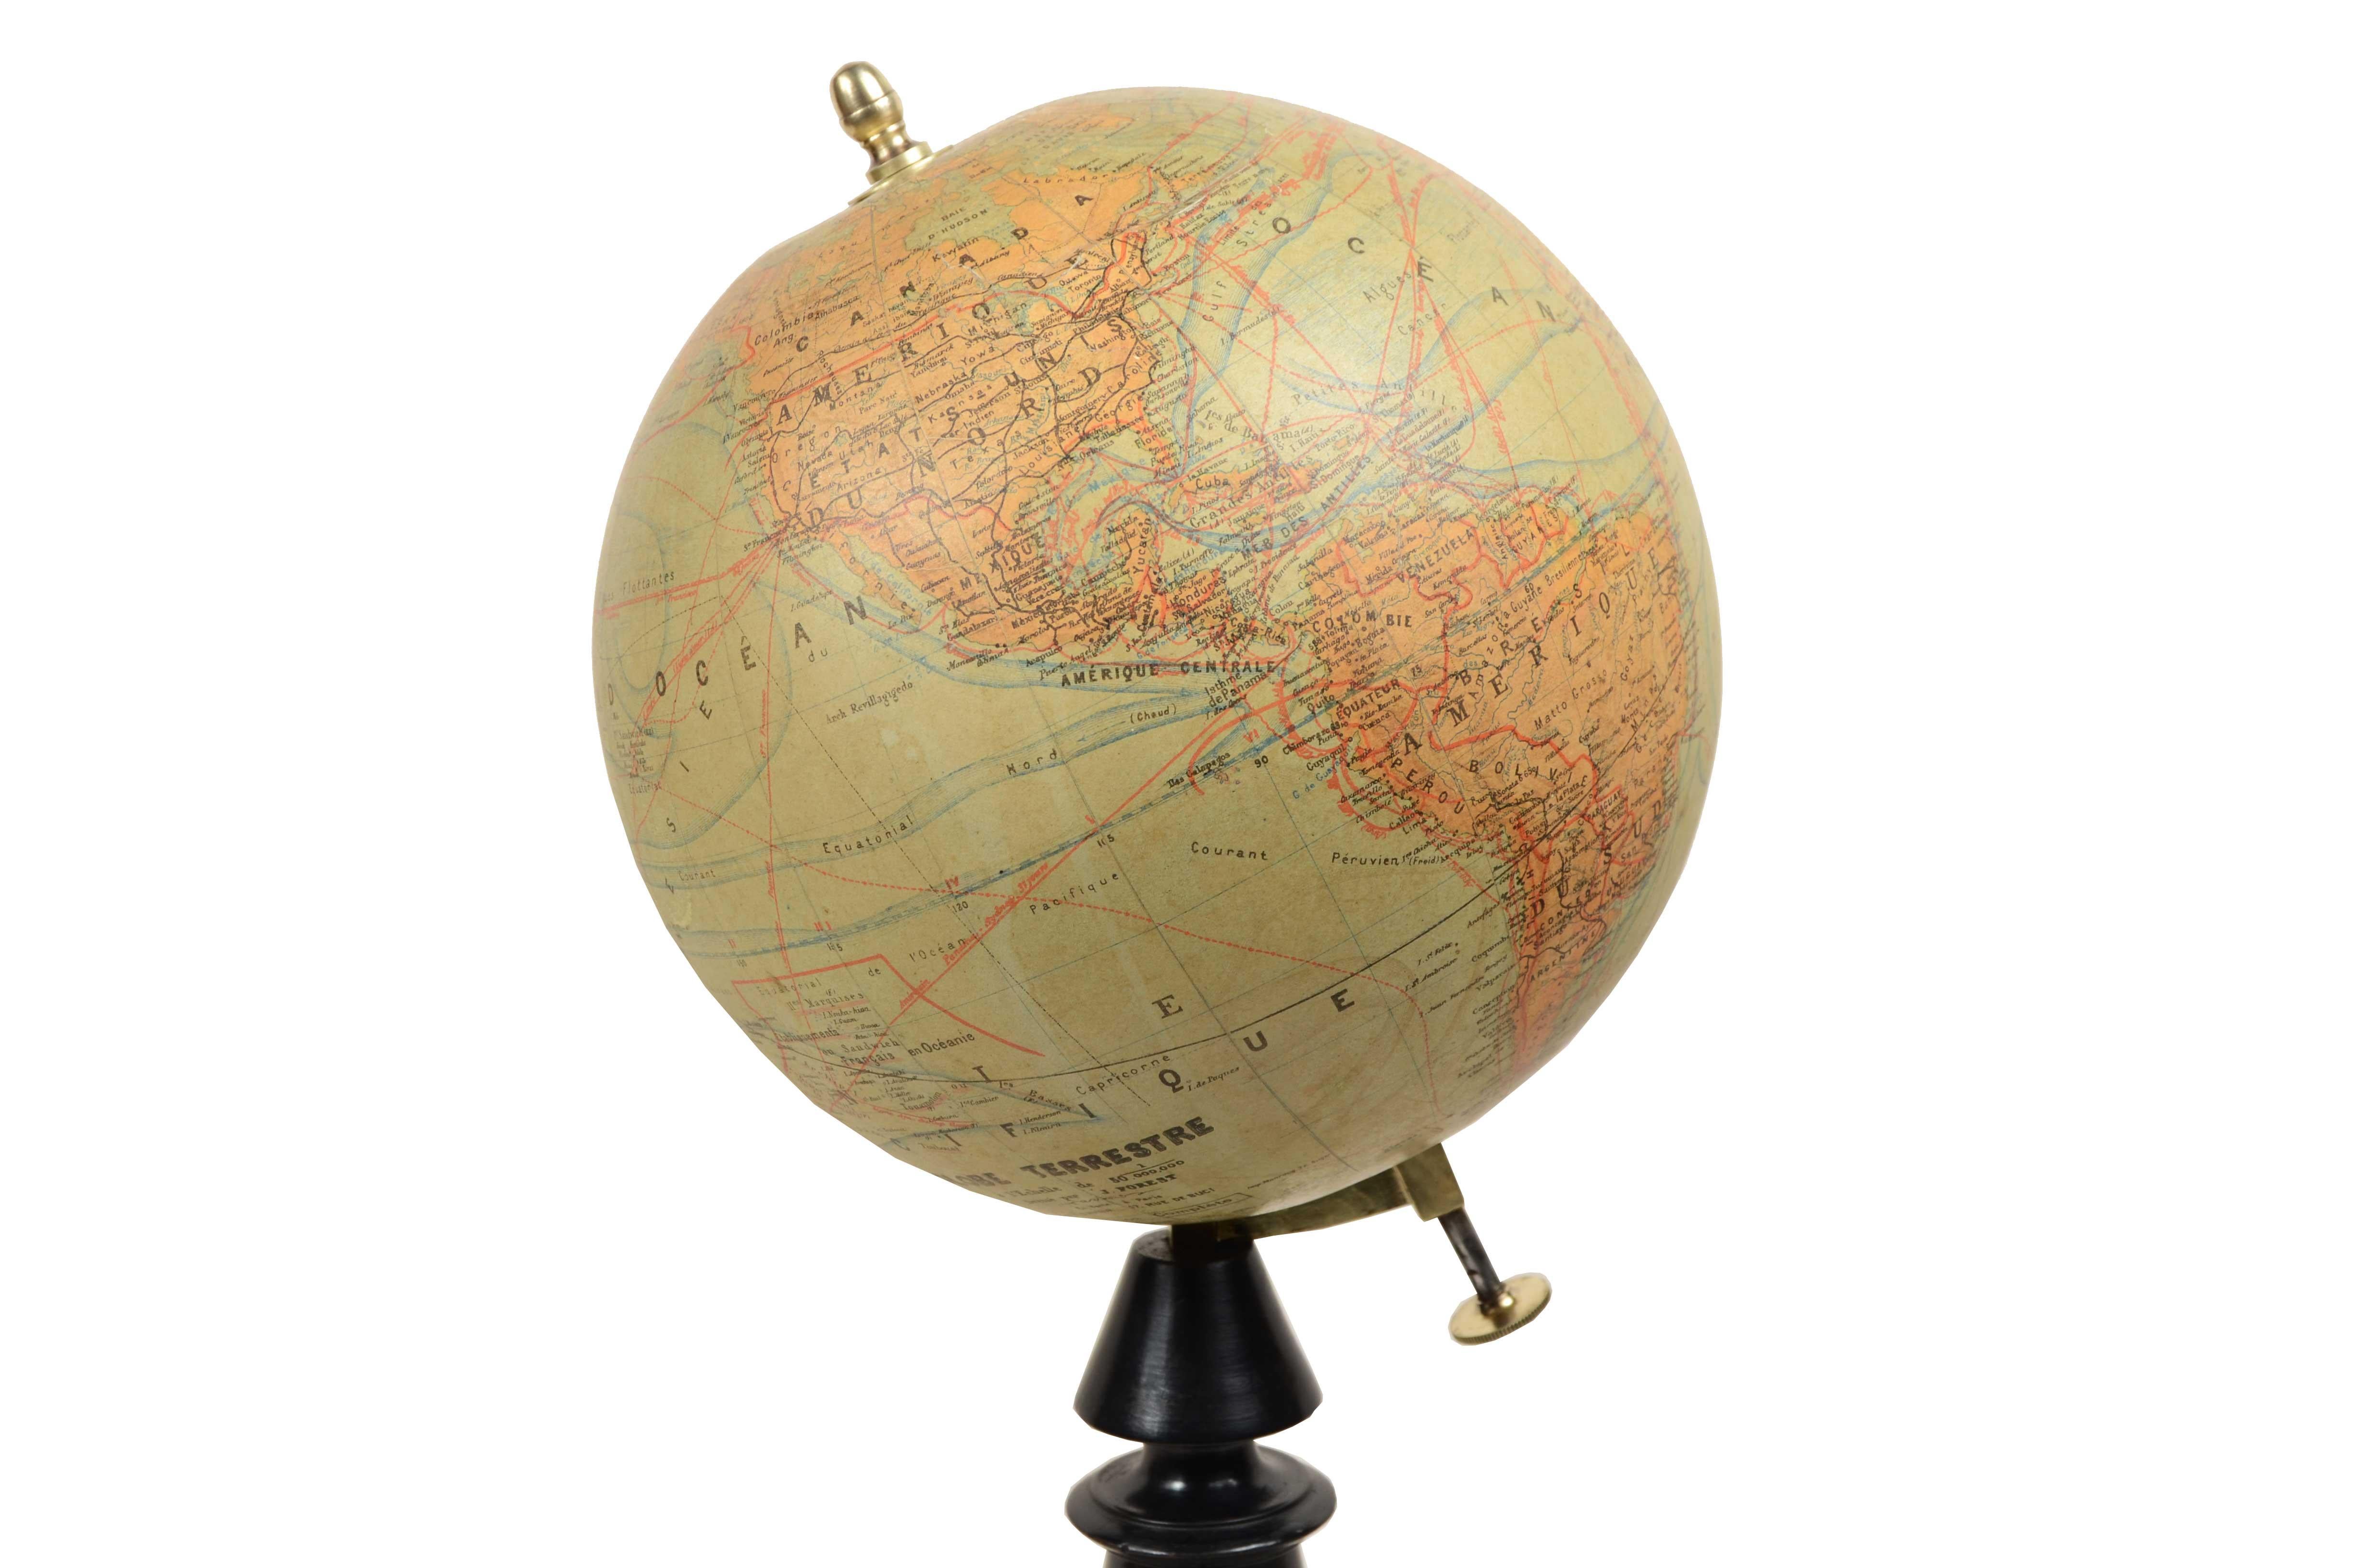 Paper Earth globe edited in the late 19th century by French geographer J. Forest For Sale